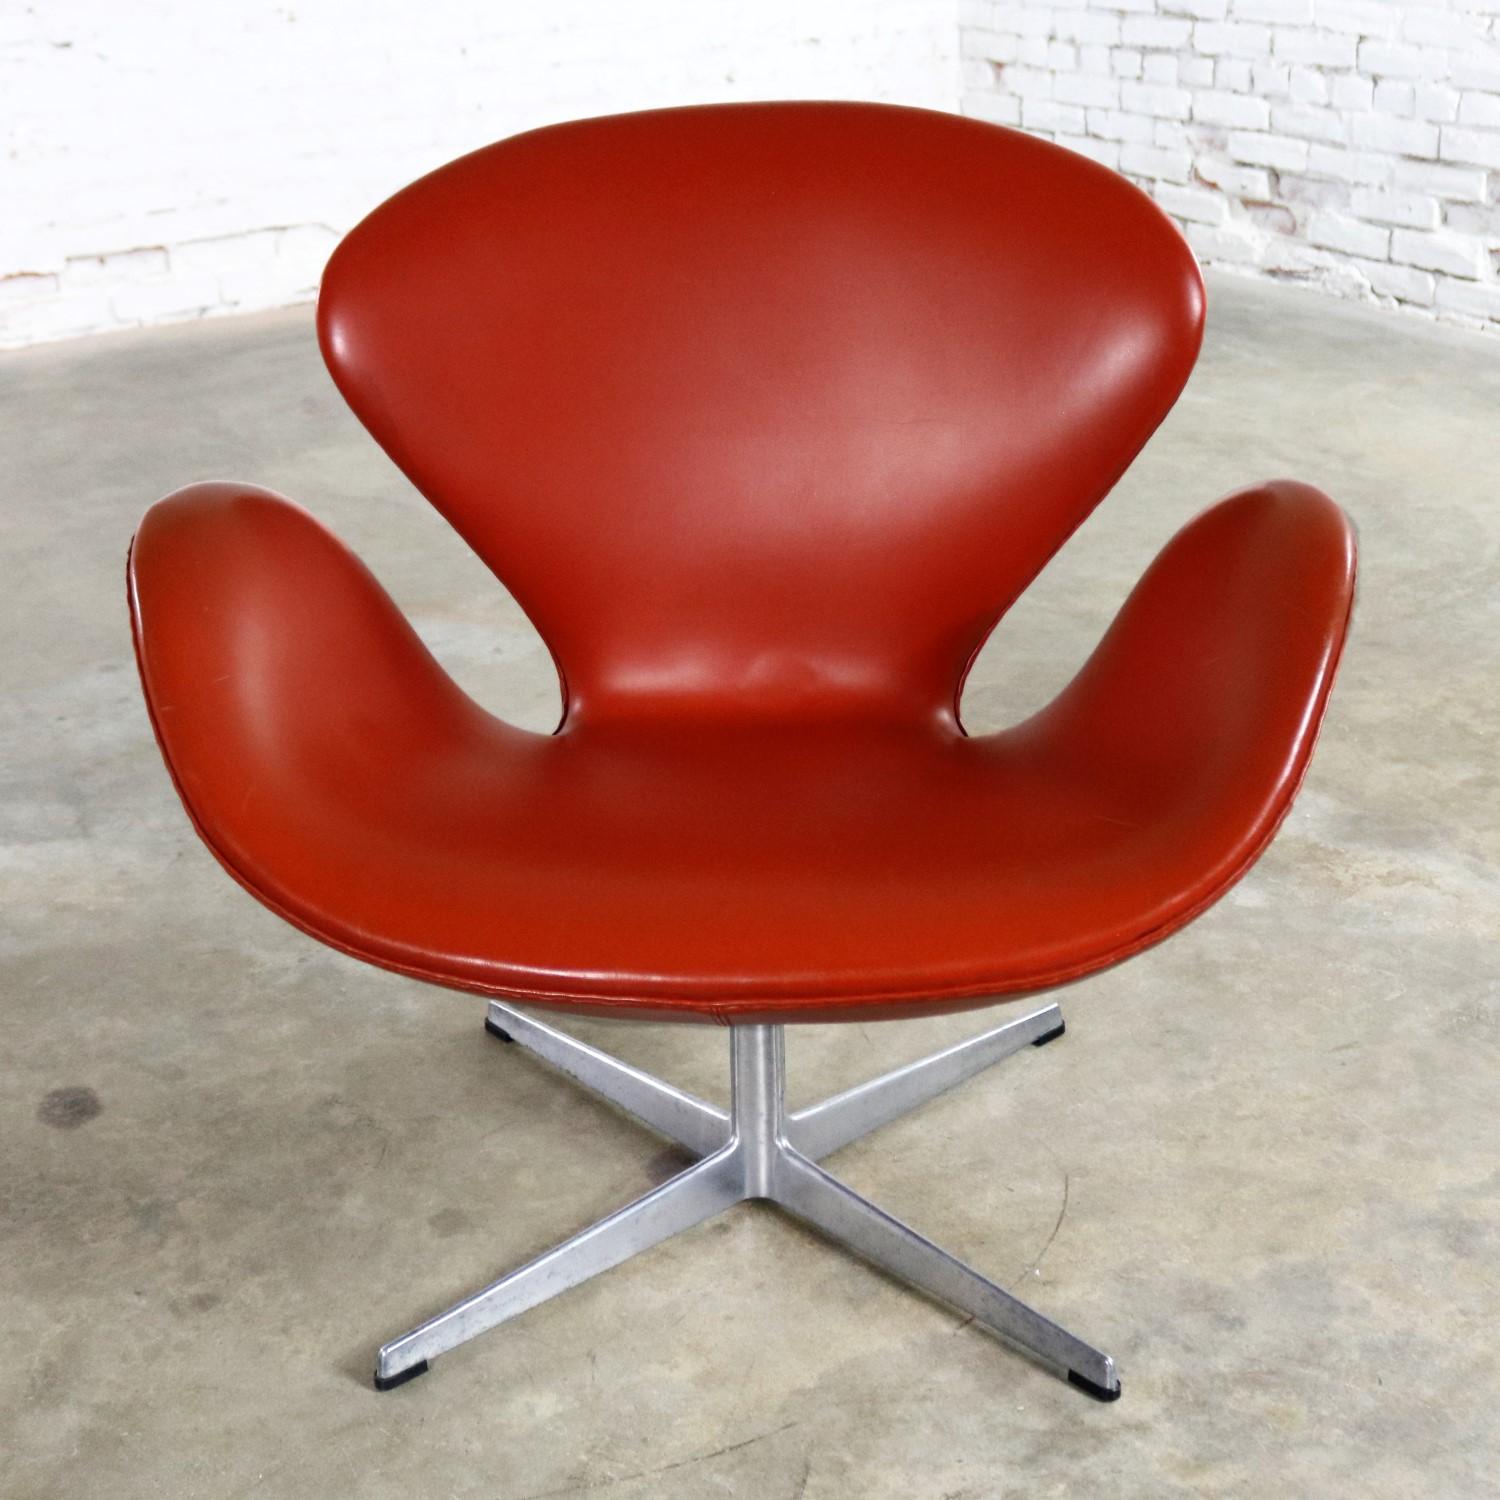 Iconic Mid-Century Modern Swan chair by Arne Jacobsen for Fritz Hansen in cognac colored Naugahyde vinyl upholstery. It is in wonderful vintage condition with normal wear and tear for age and use. There are a few nicks to the vinyl that have been